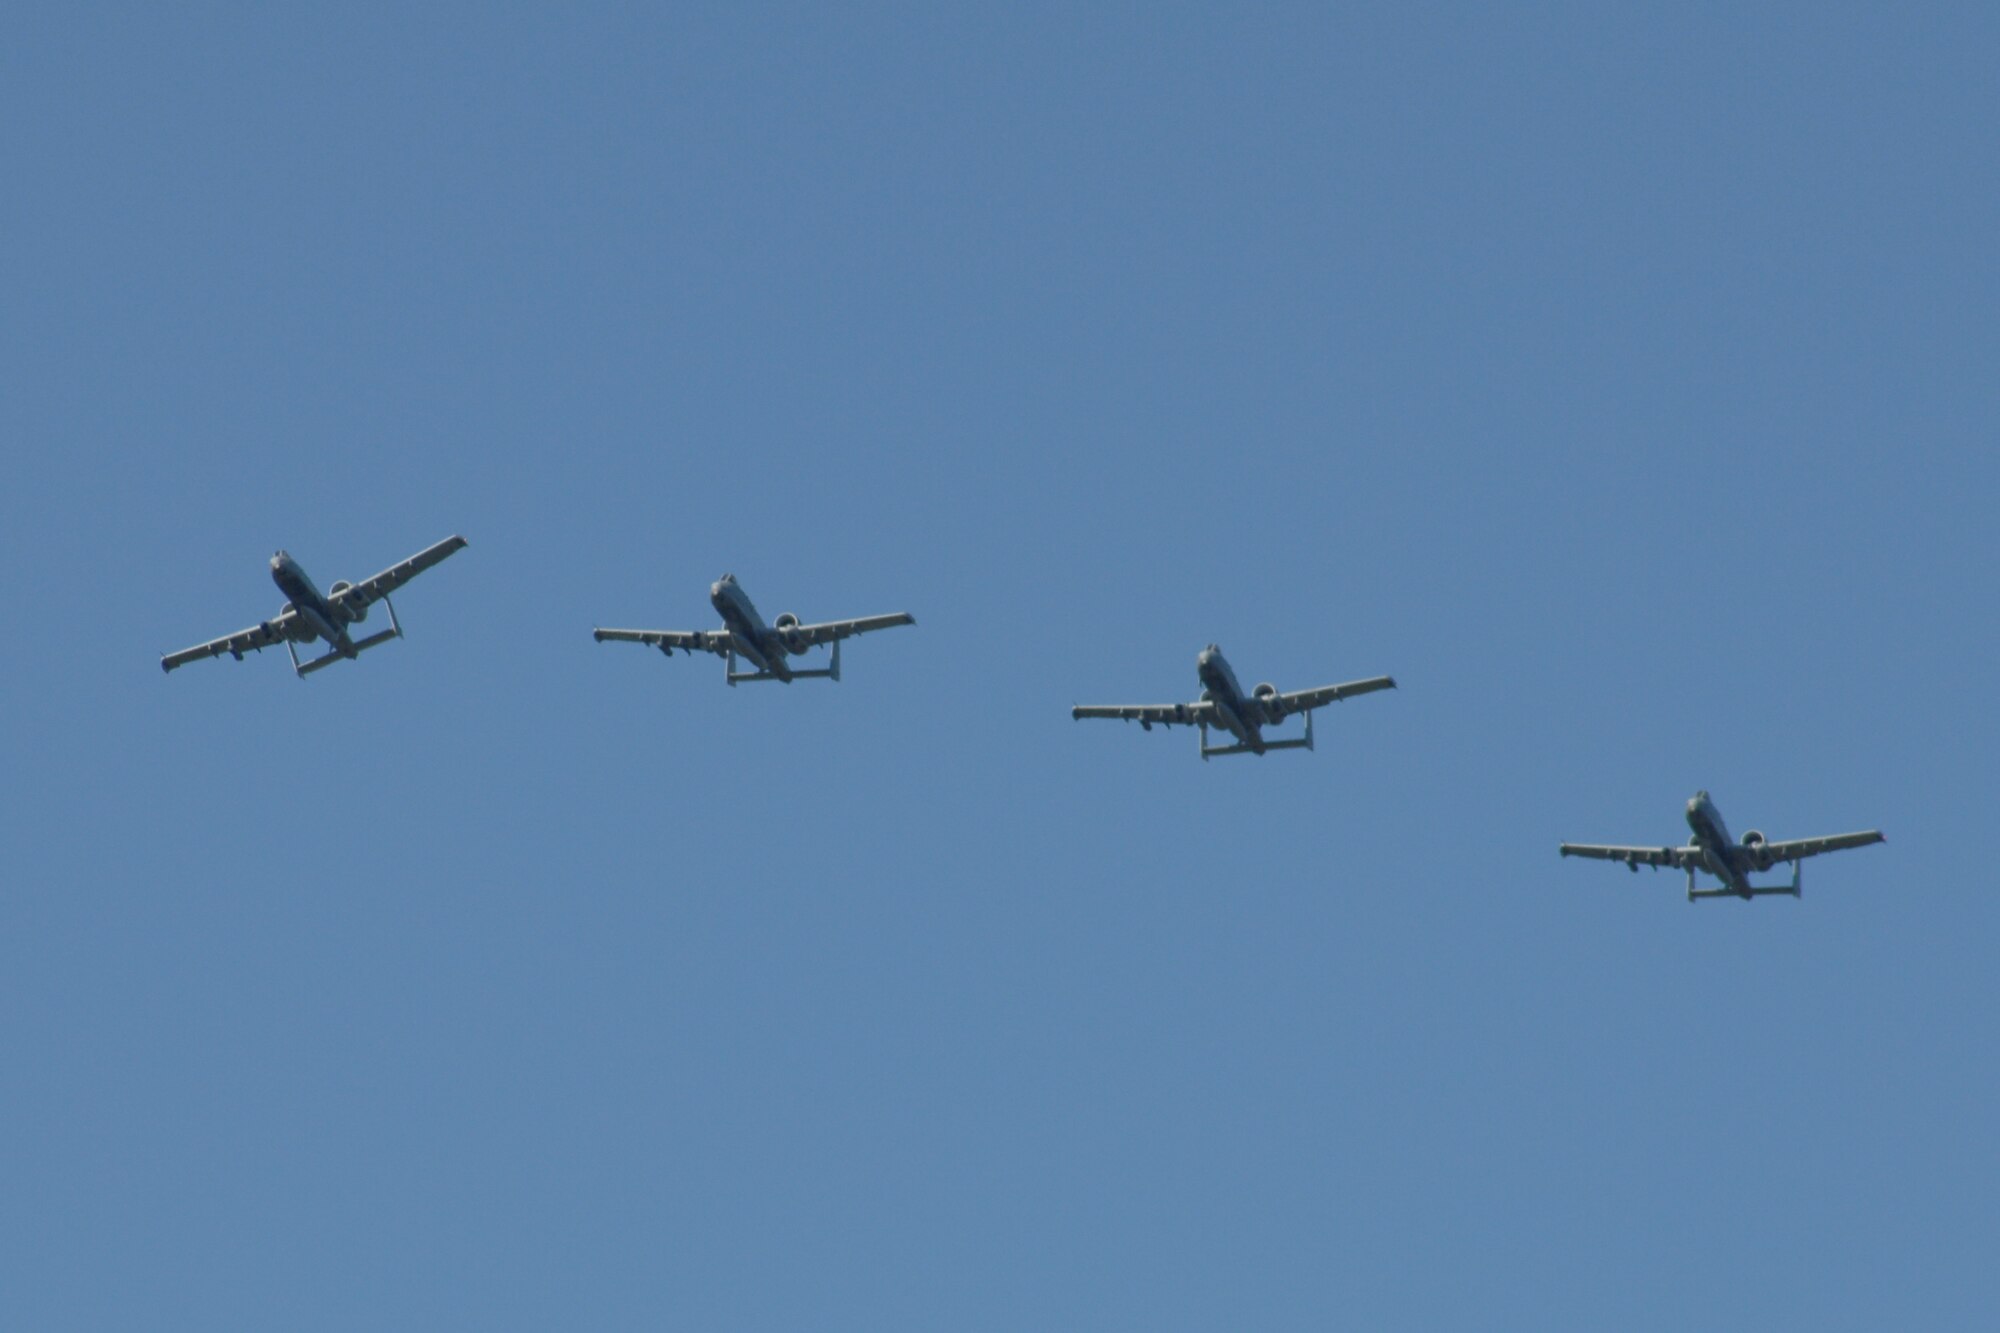 A formation of U.S. Air Force A-10 Thunderbolt II aircraft fly over Amari Air Base, Estonia, prior to landing, June 8, 2012. The aircraft, flown by the 107th Fighter Squadron, Michigan Air National Guard, are believed to be the first A-10s to ever land in Estonia. The aircraft and their Airmen were in Estonia to participate in Saber Strike 2012, a multi-national exercise based in Estonia and Latvia. (National Guard photo by SSgt. Rachel Barton)